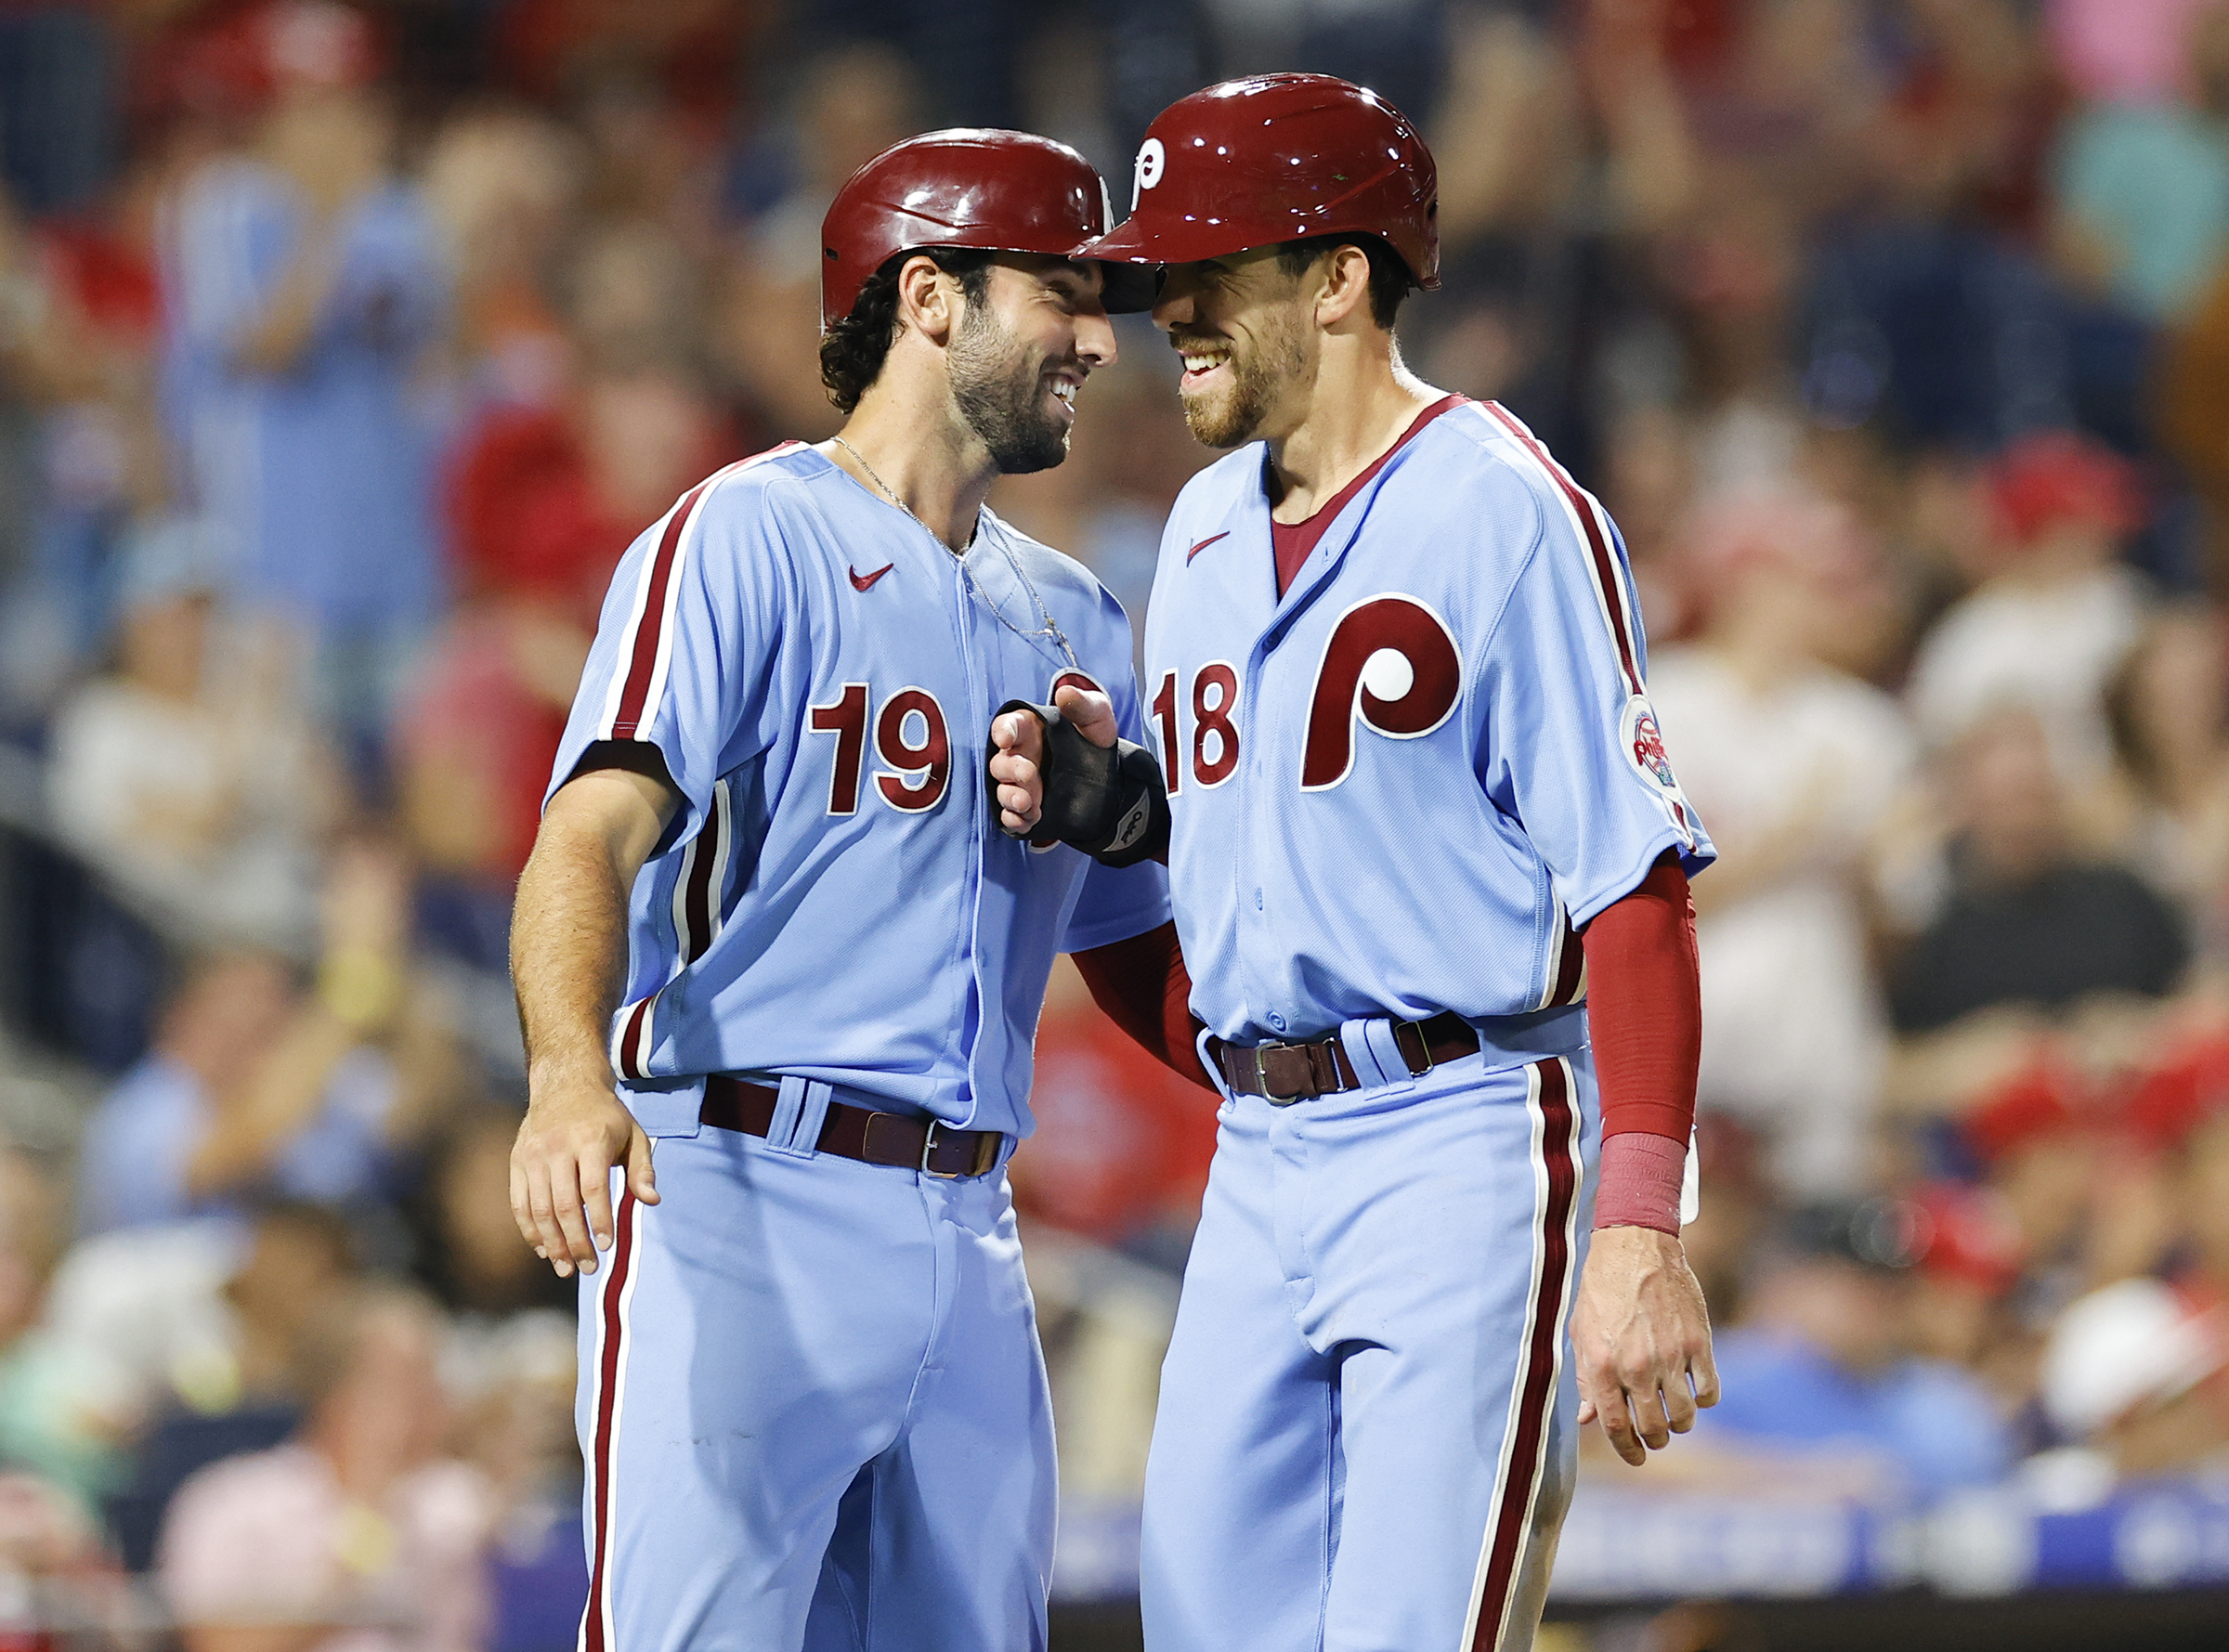 Aaron Nola strikes out 11 Reds as Phillies sweep four-game series